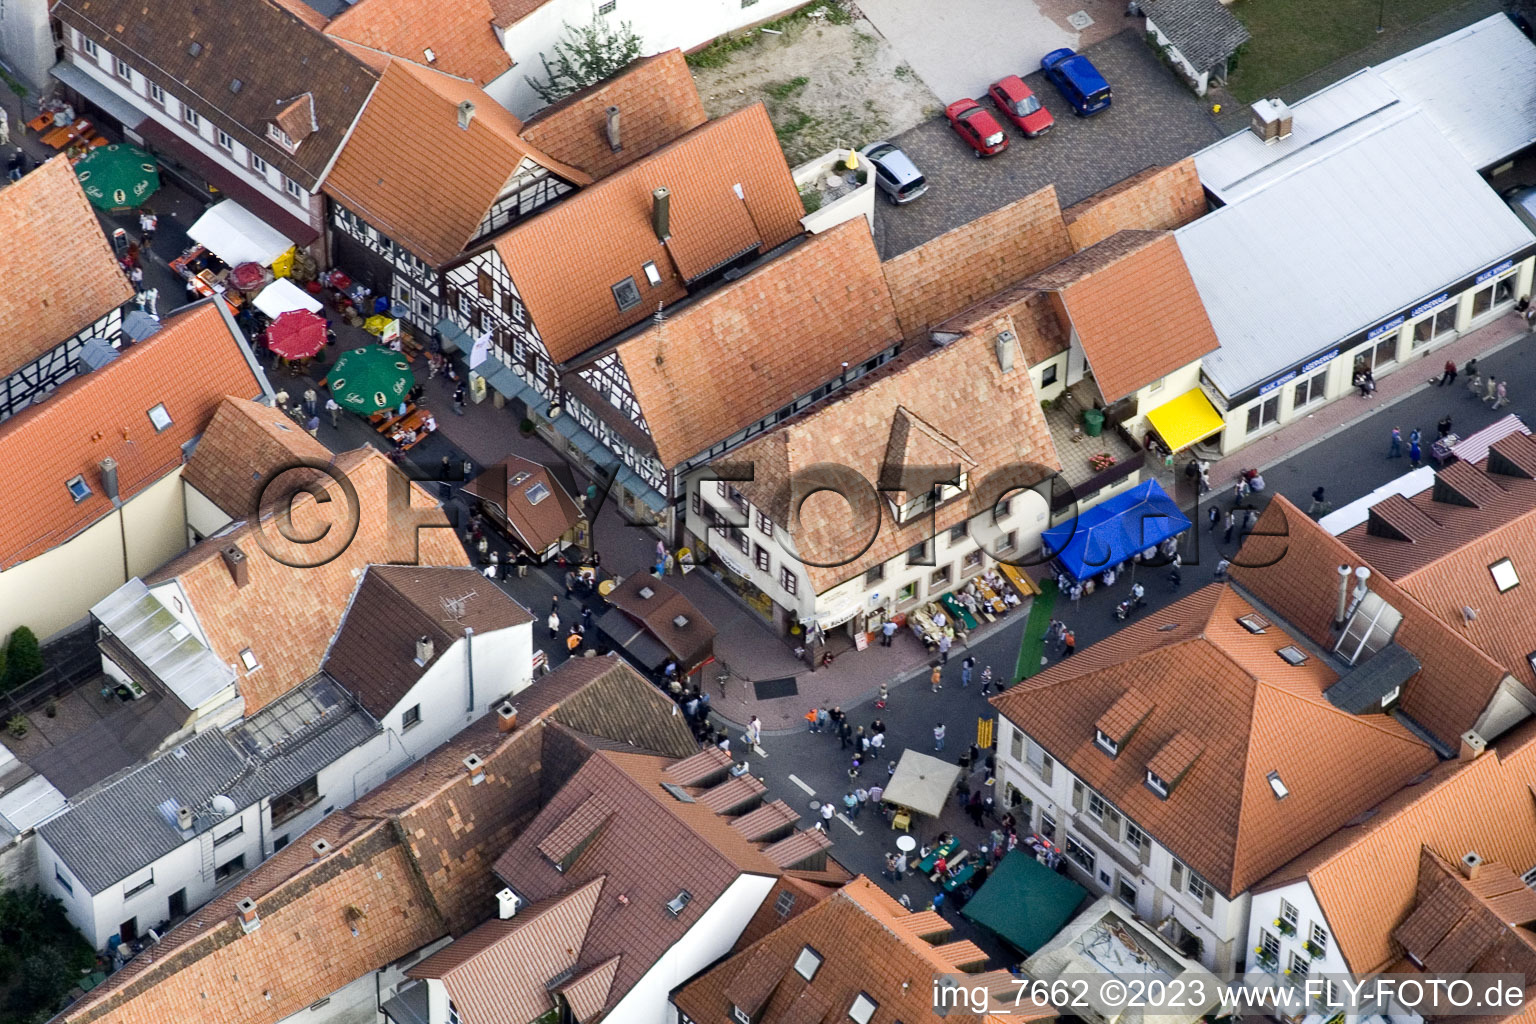 Oblique view of City festival, Hauptstr in Kandel in the state Rhineland-Palatinate, Germany